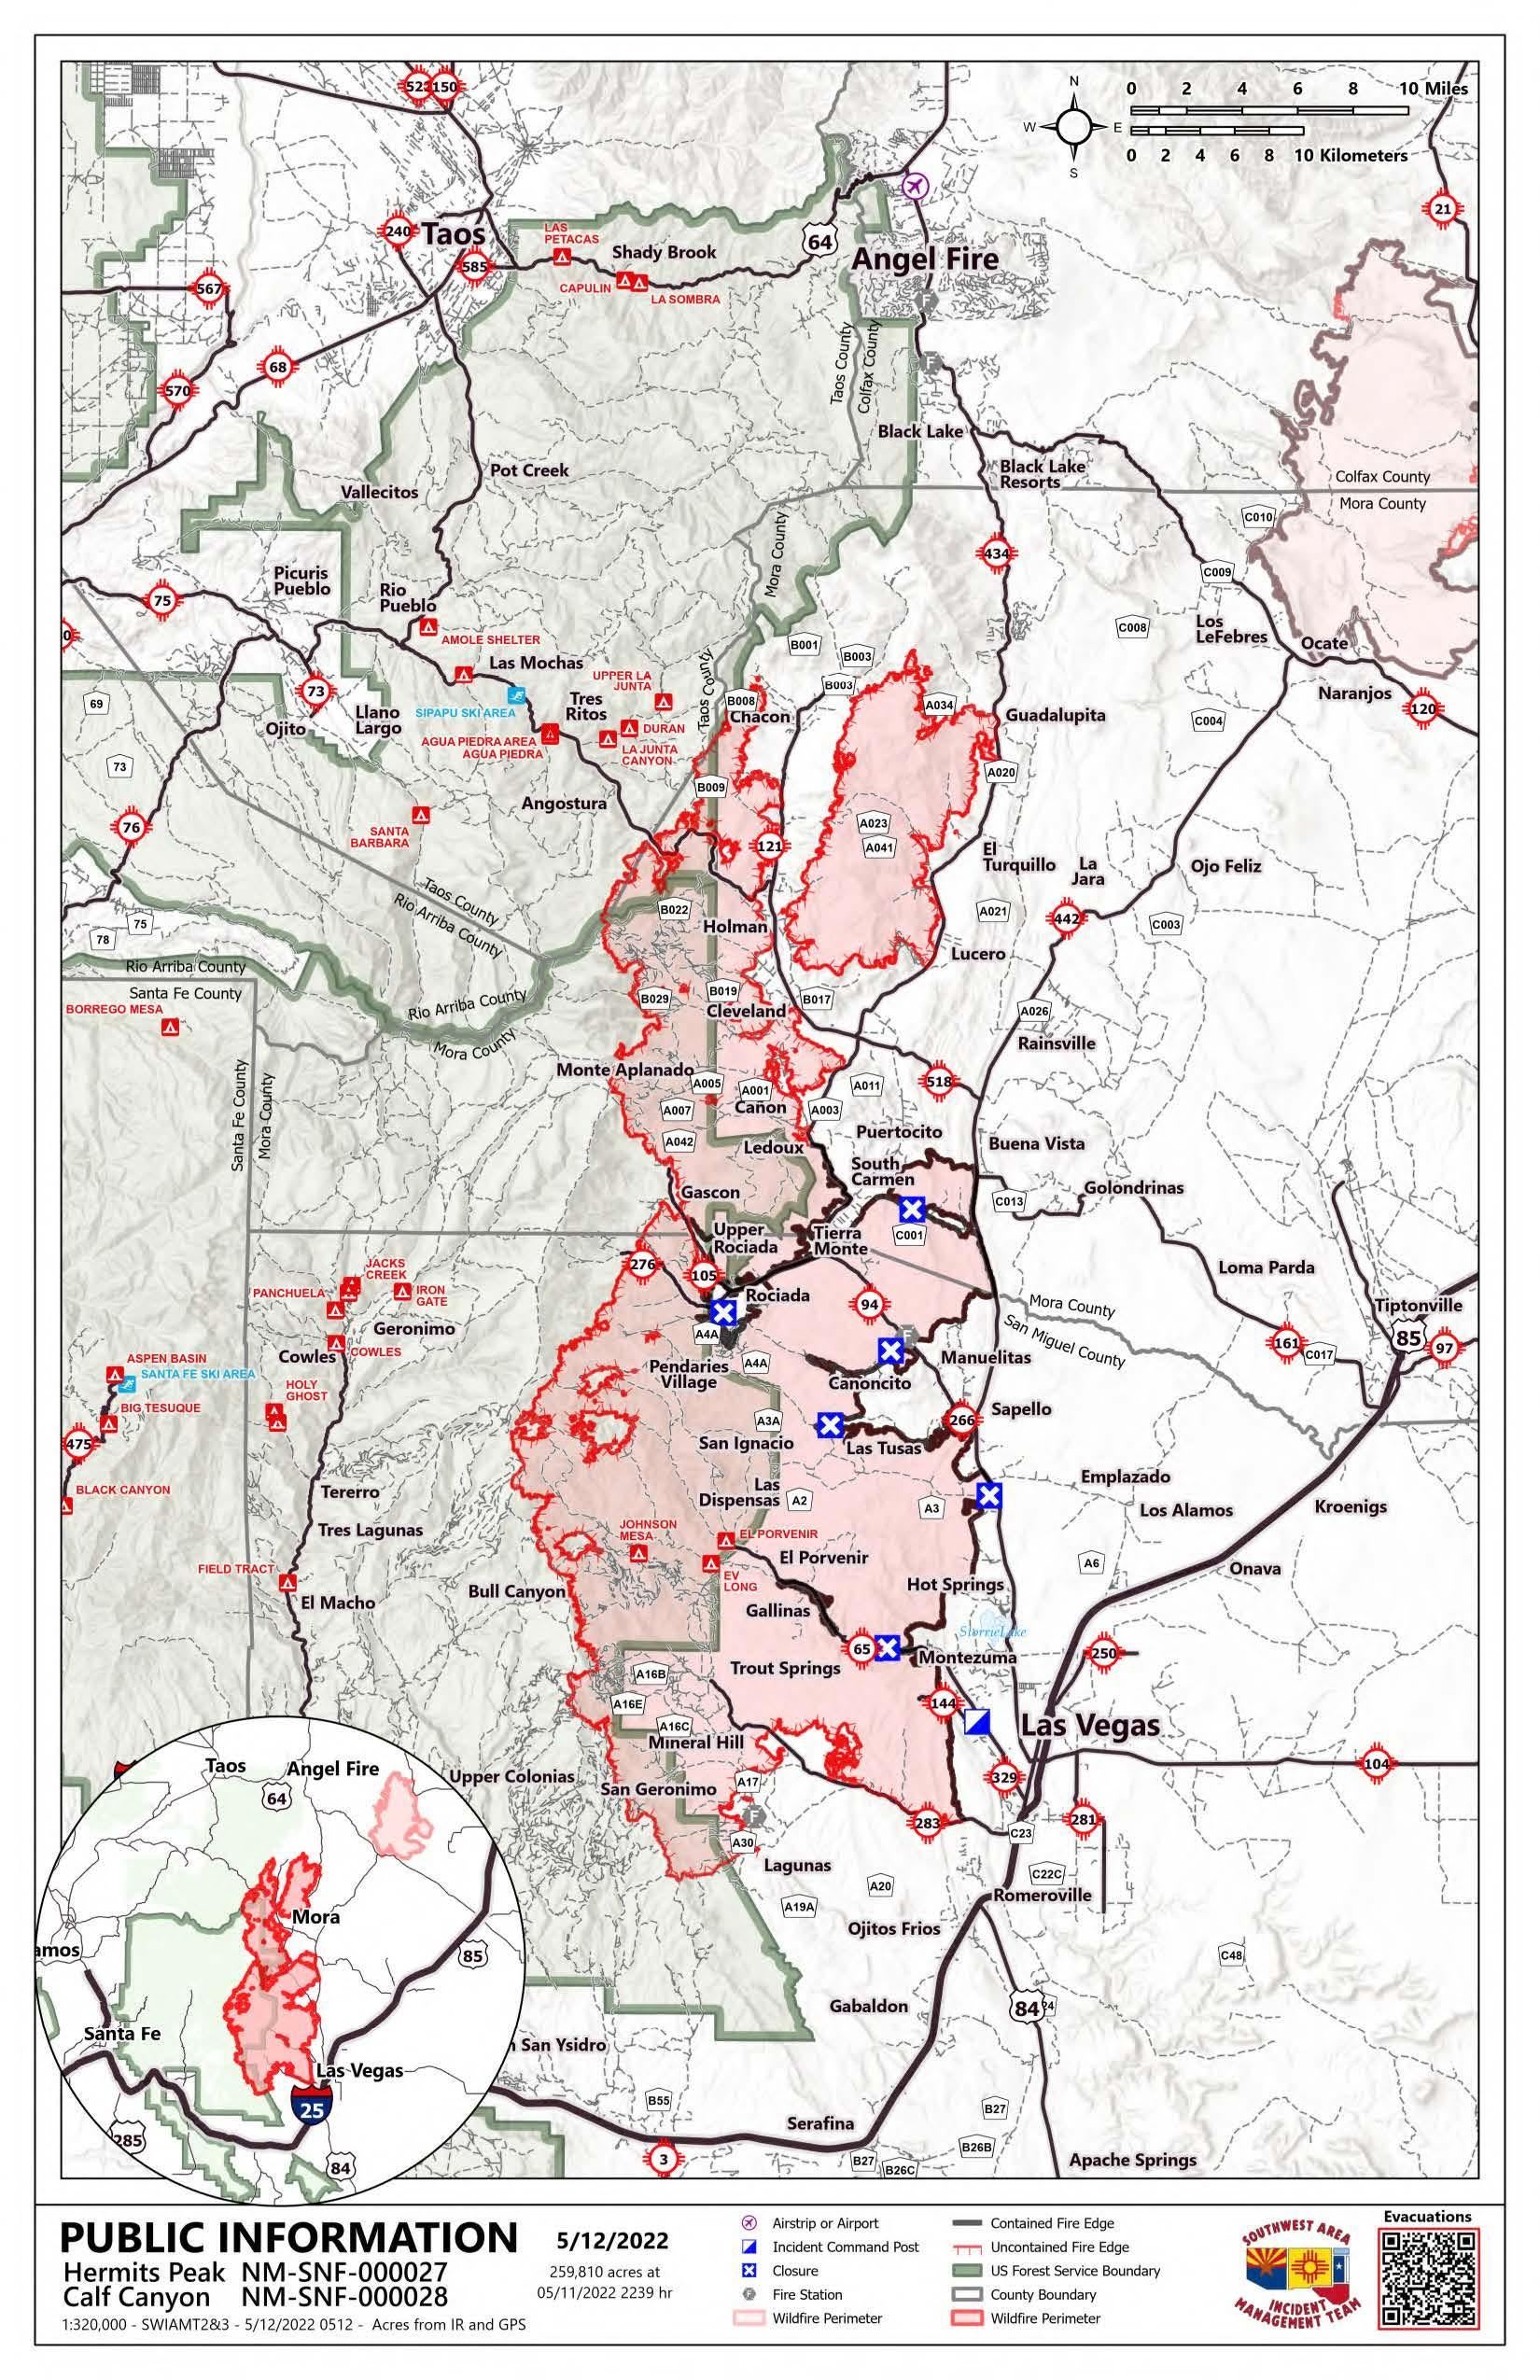 A map of the Calf Canyon/Hermits Peak fire in New Mexico as of May 12, 2022